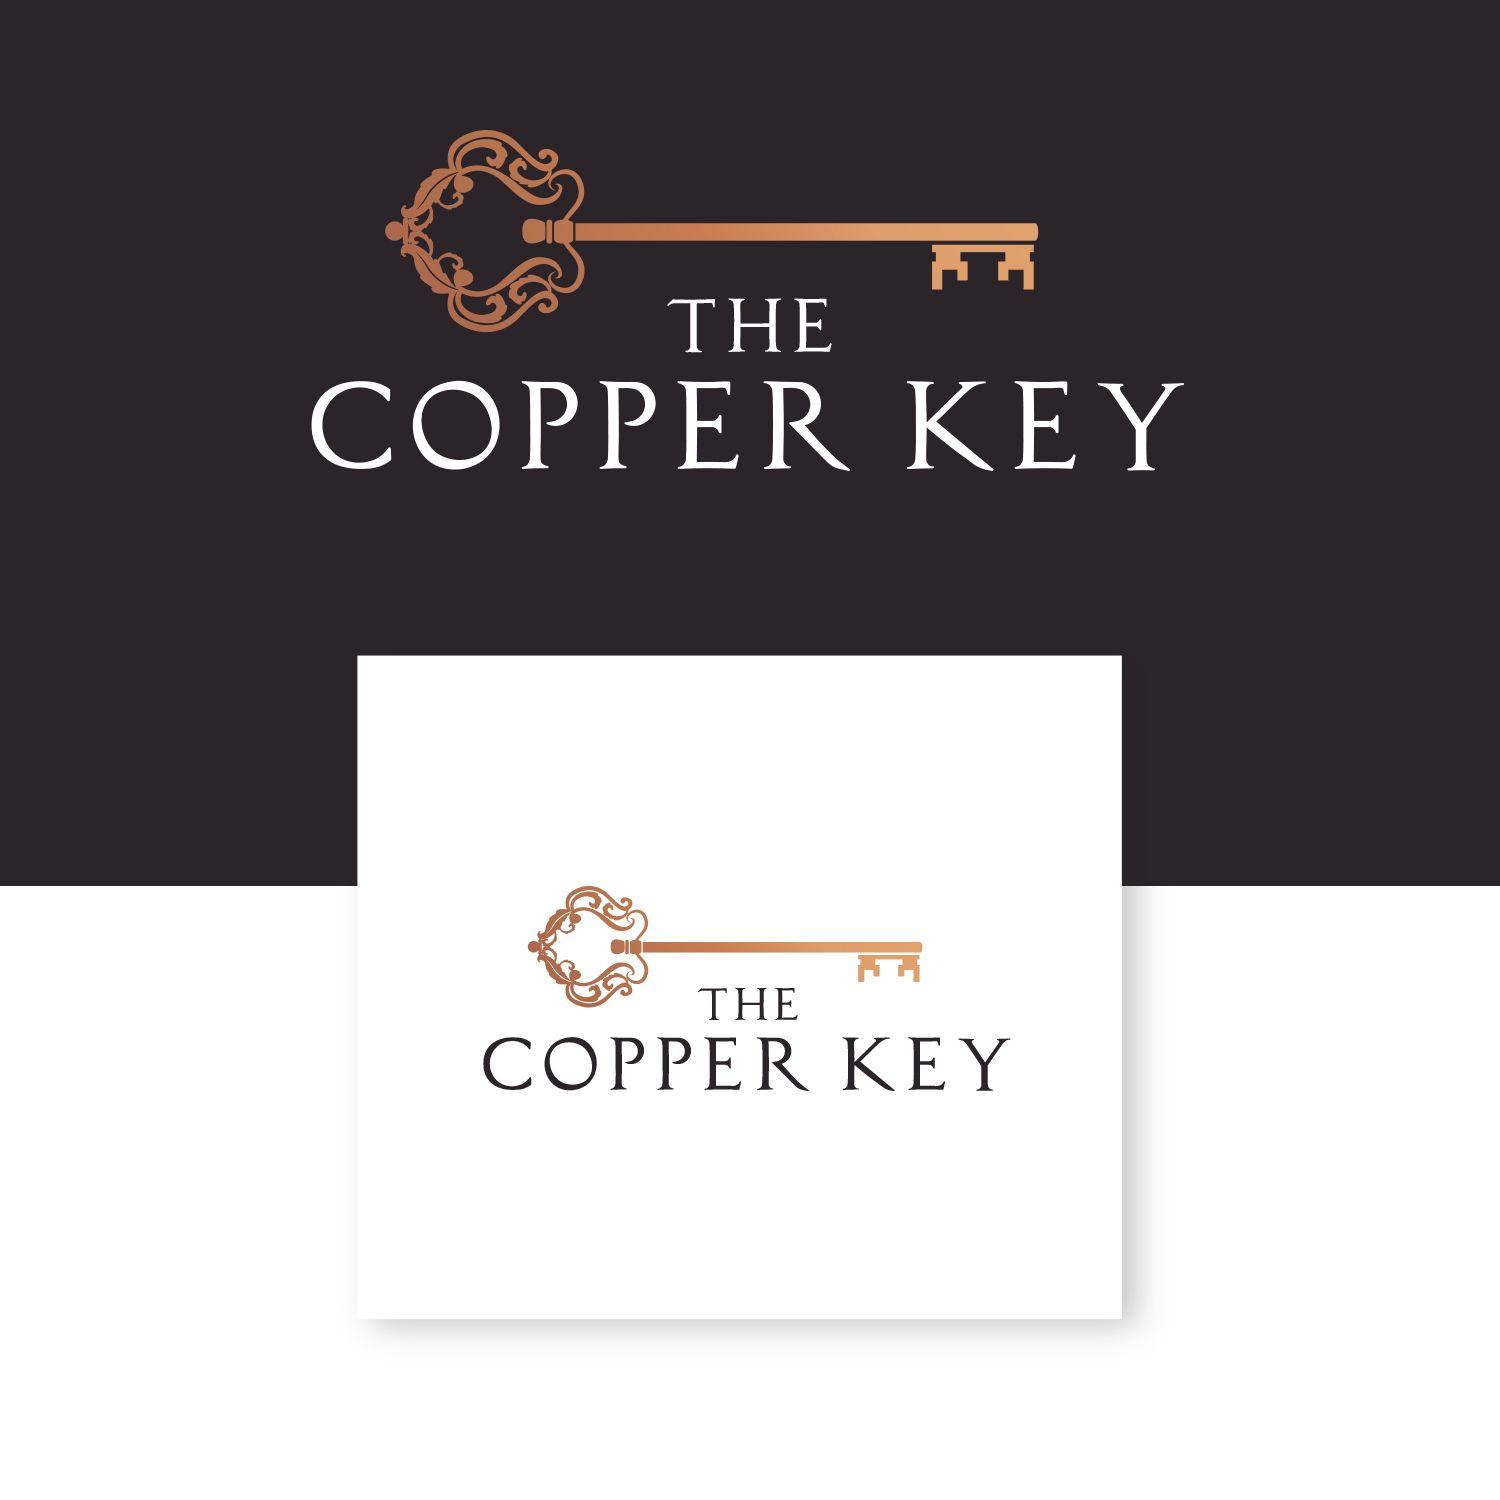 Copper and Gray Logo - Elegant, Professional, Catering Logo Design for The Copper Key by ...